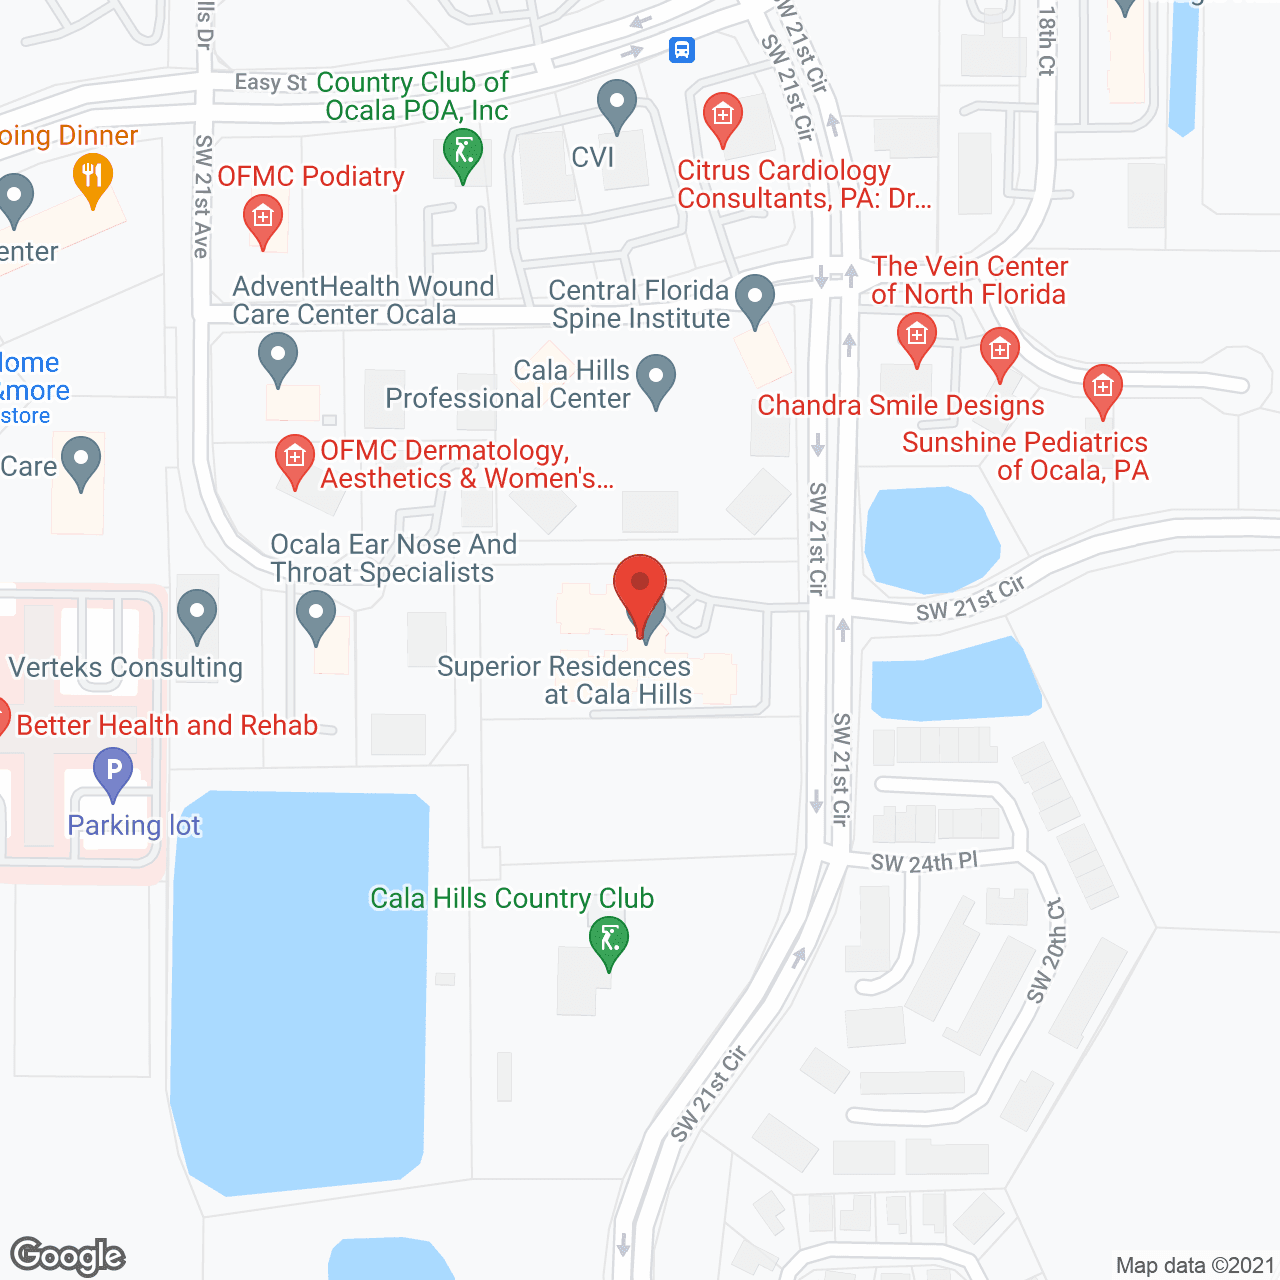 Superior Residences at Cala Hills in google map